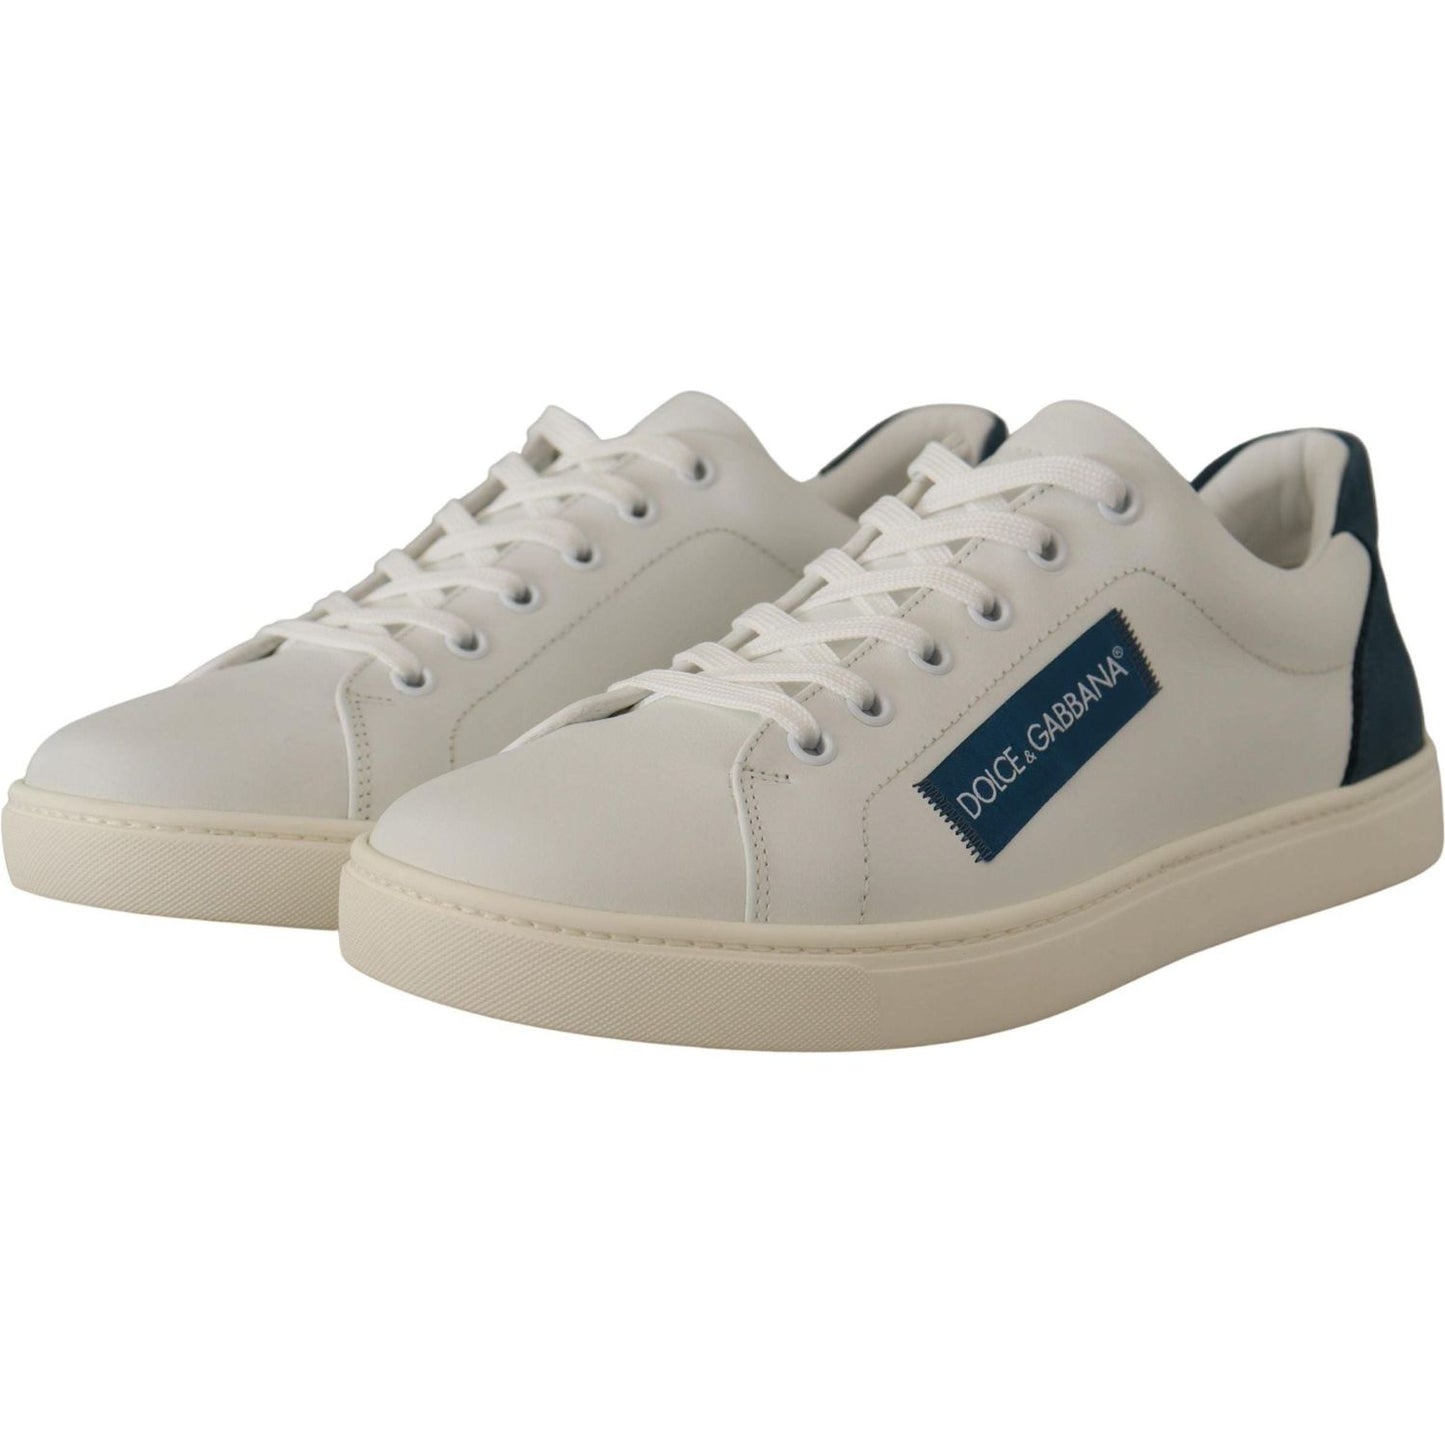 Dolce & Gabbana Chic White Leather Low-Top Sneakers white-blue-leather-low-top-sneakers-1